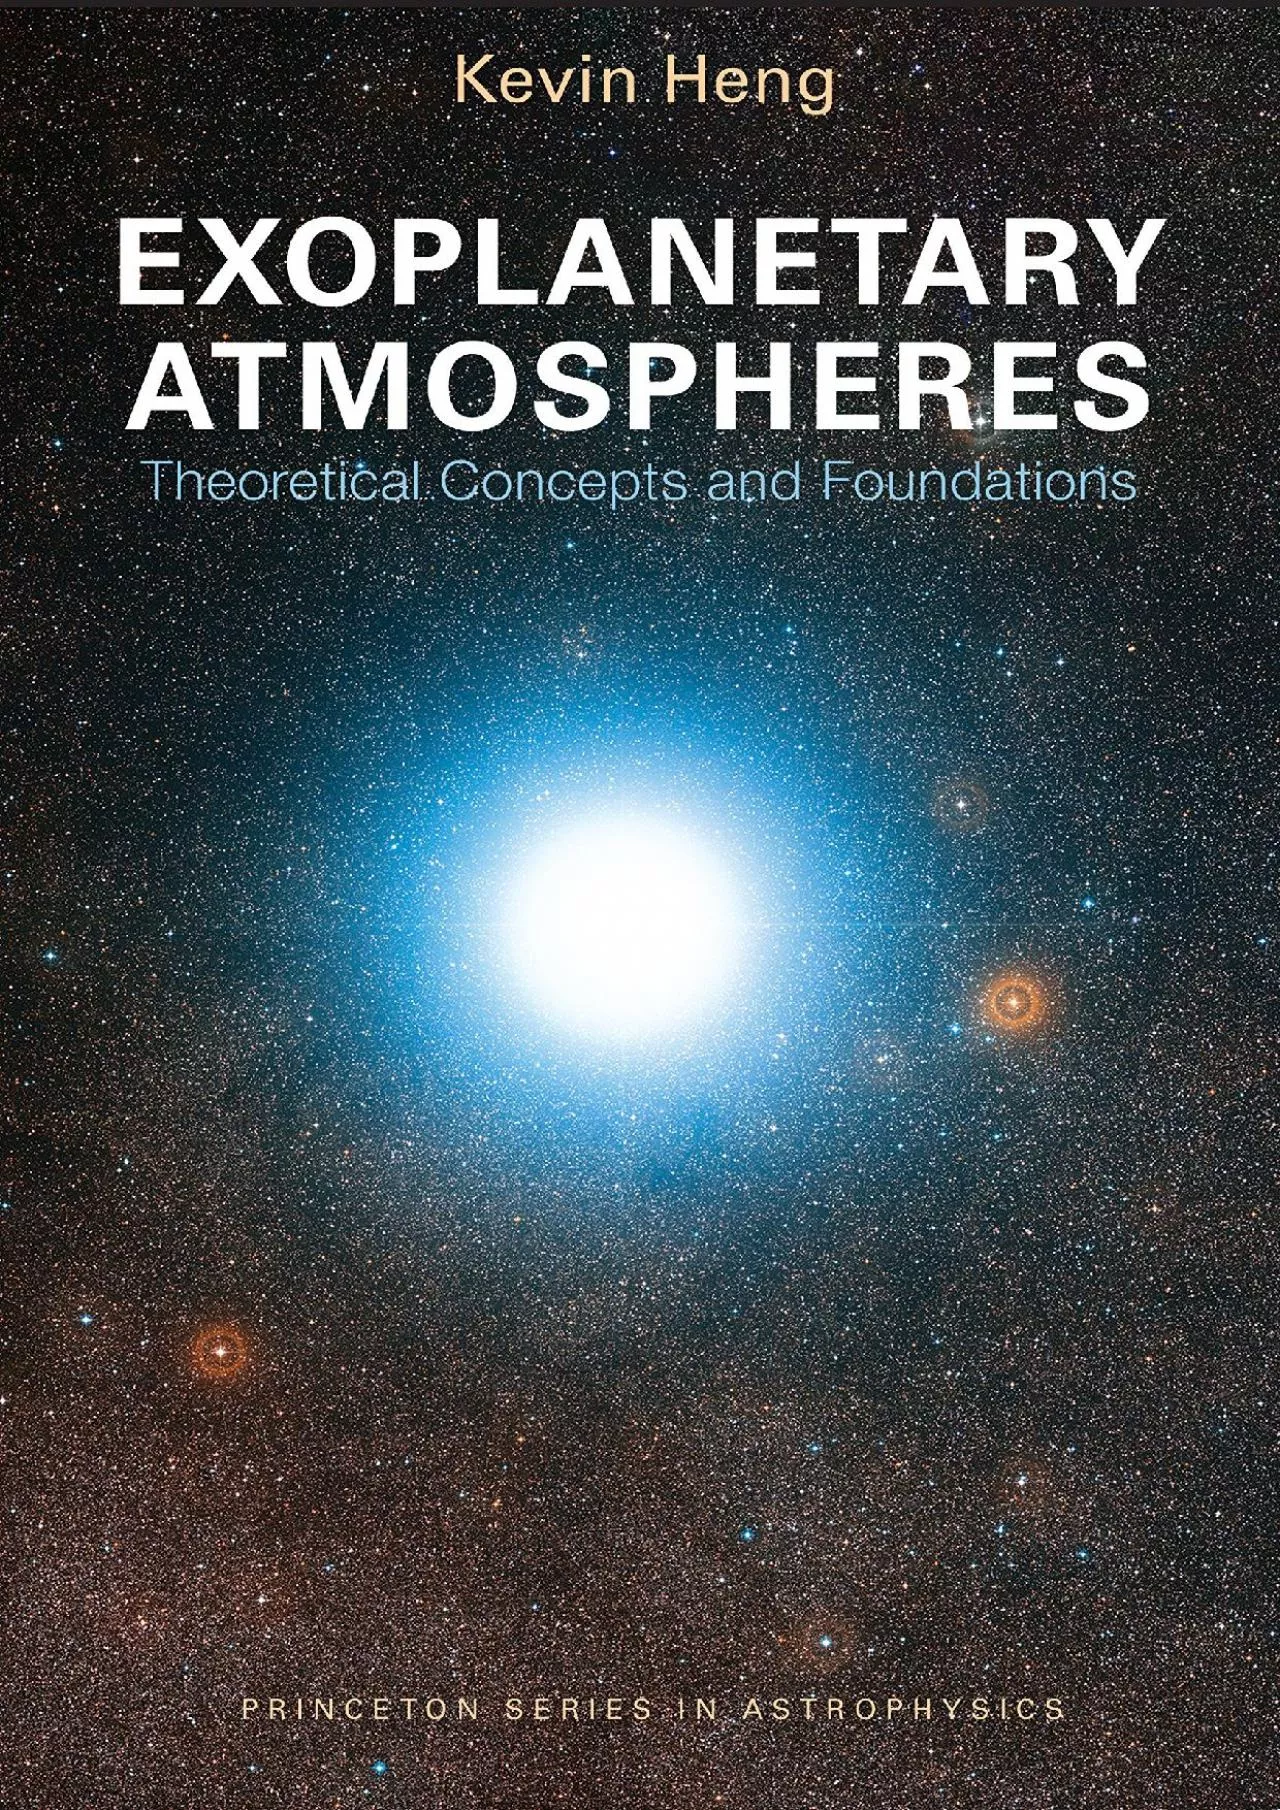 (EBOOK)-Exoplanetary Atmospheres: Theoretical Concepts and Foundations (Princeton Series